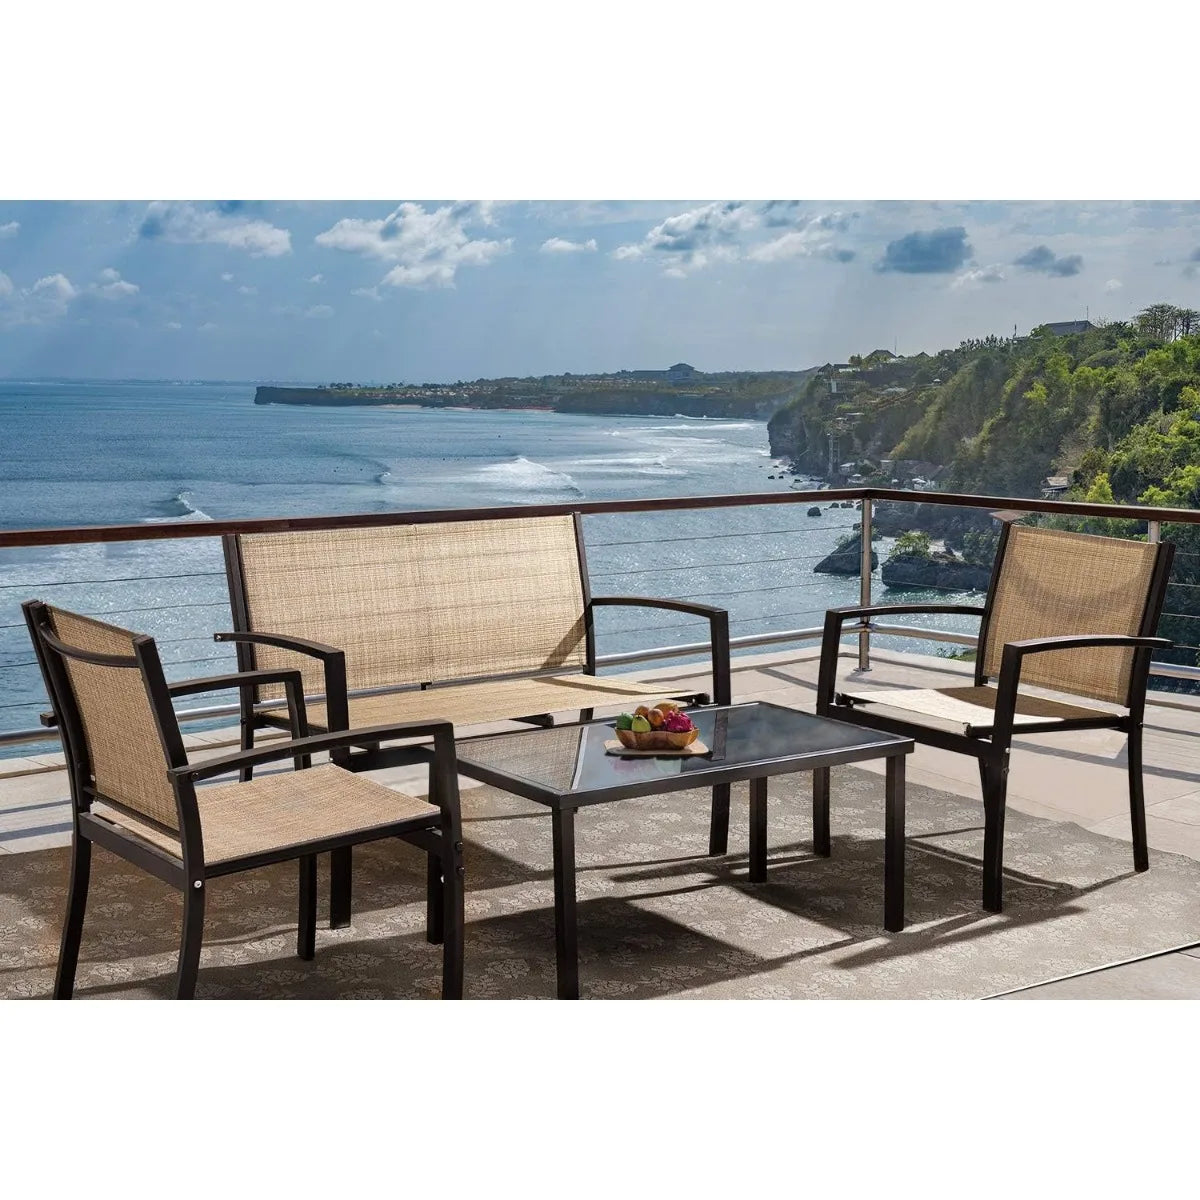 Tuoze 4 Pieces Outdoor Patio Furniture Conversation Glass Coffee Table Bistro Set with Loveseat Garden Yard Lawn and Balcony